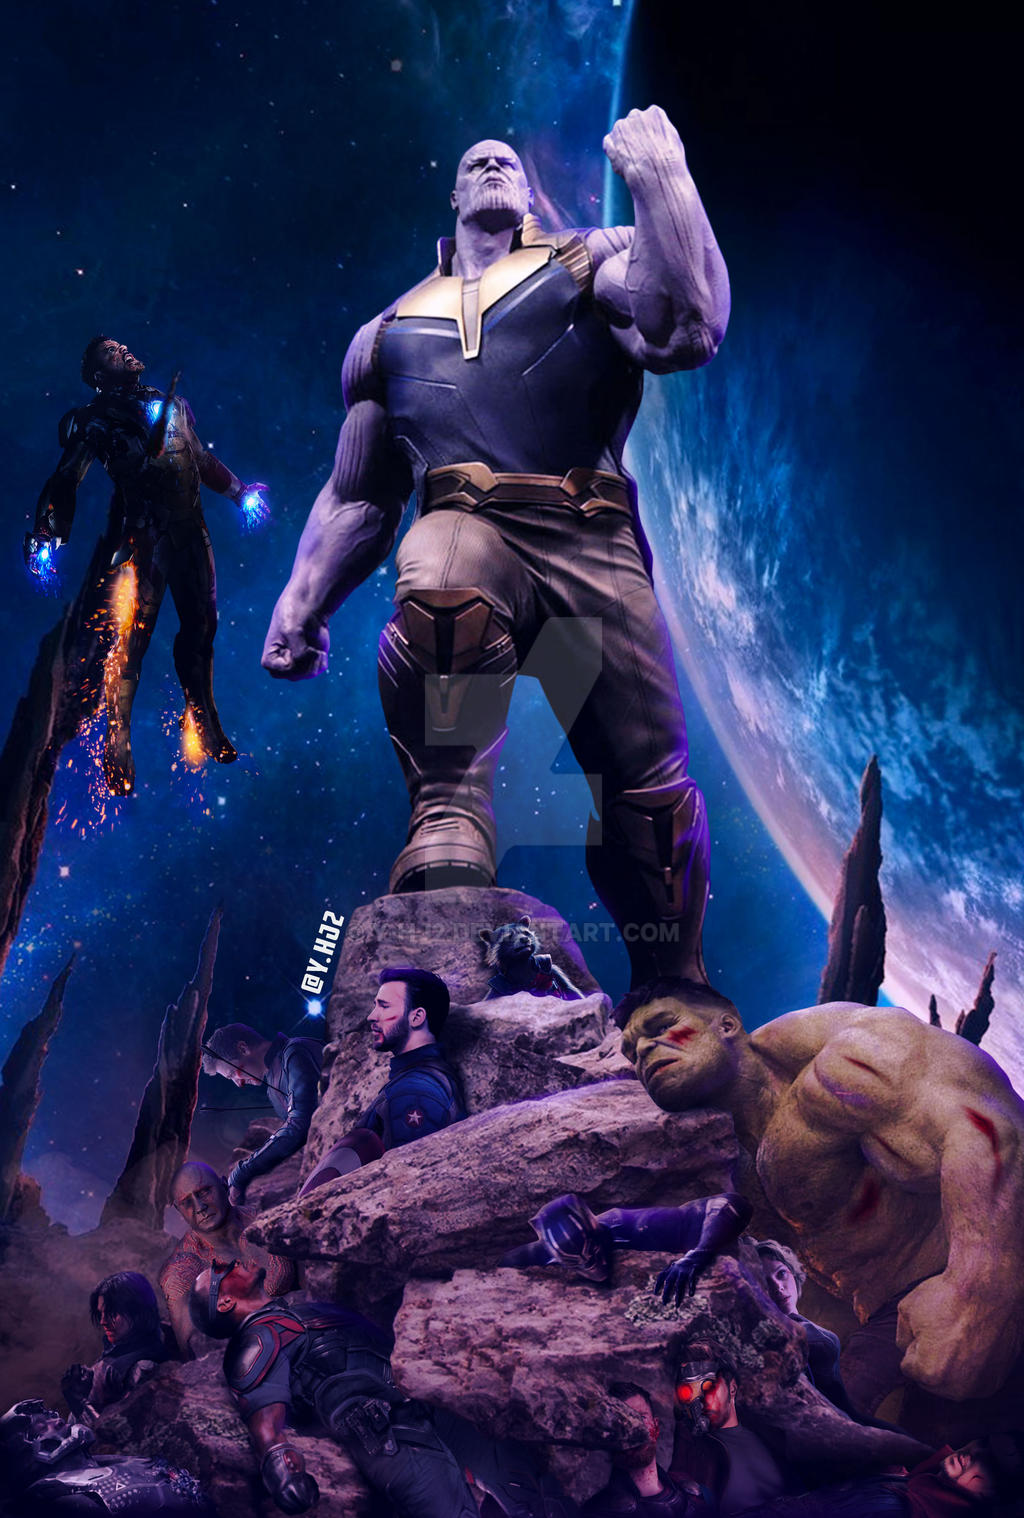 Avengers Infinity War Thanos Poster By Yhj2 By Y Hj2 On Deviantart